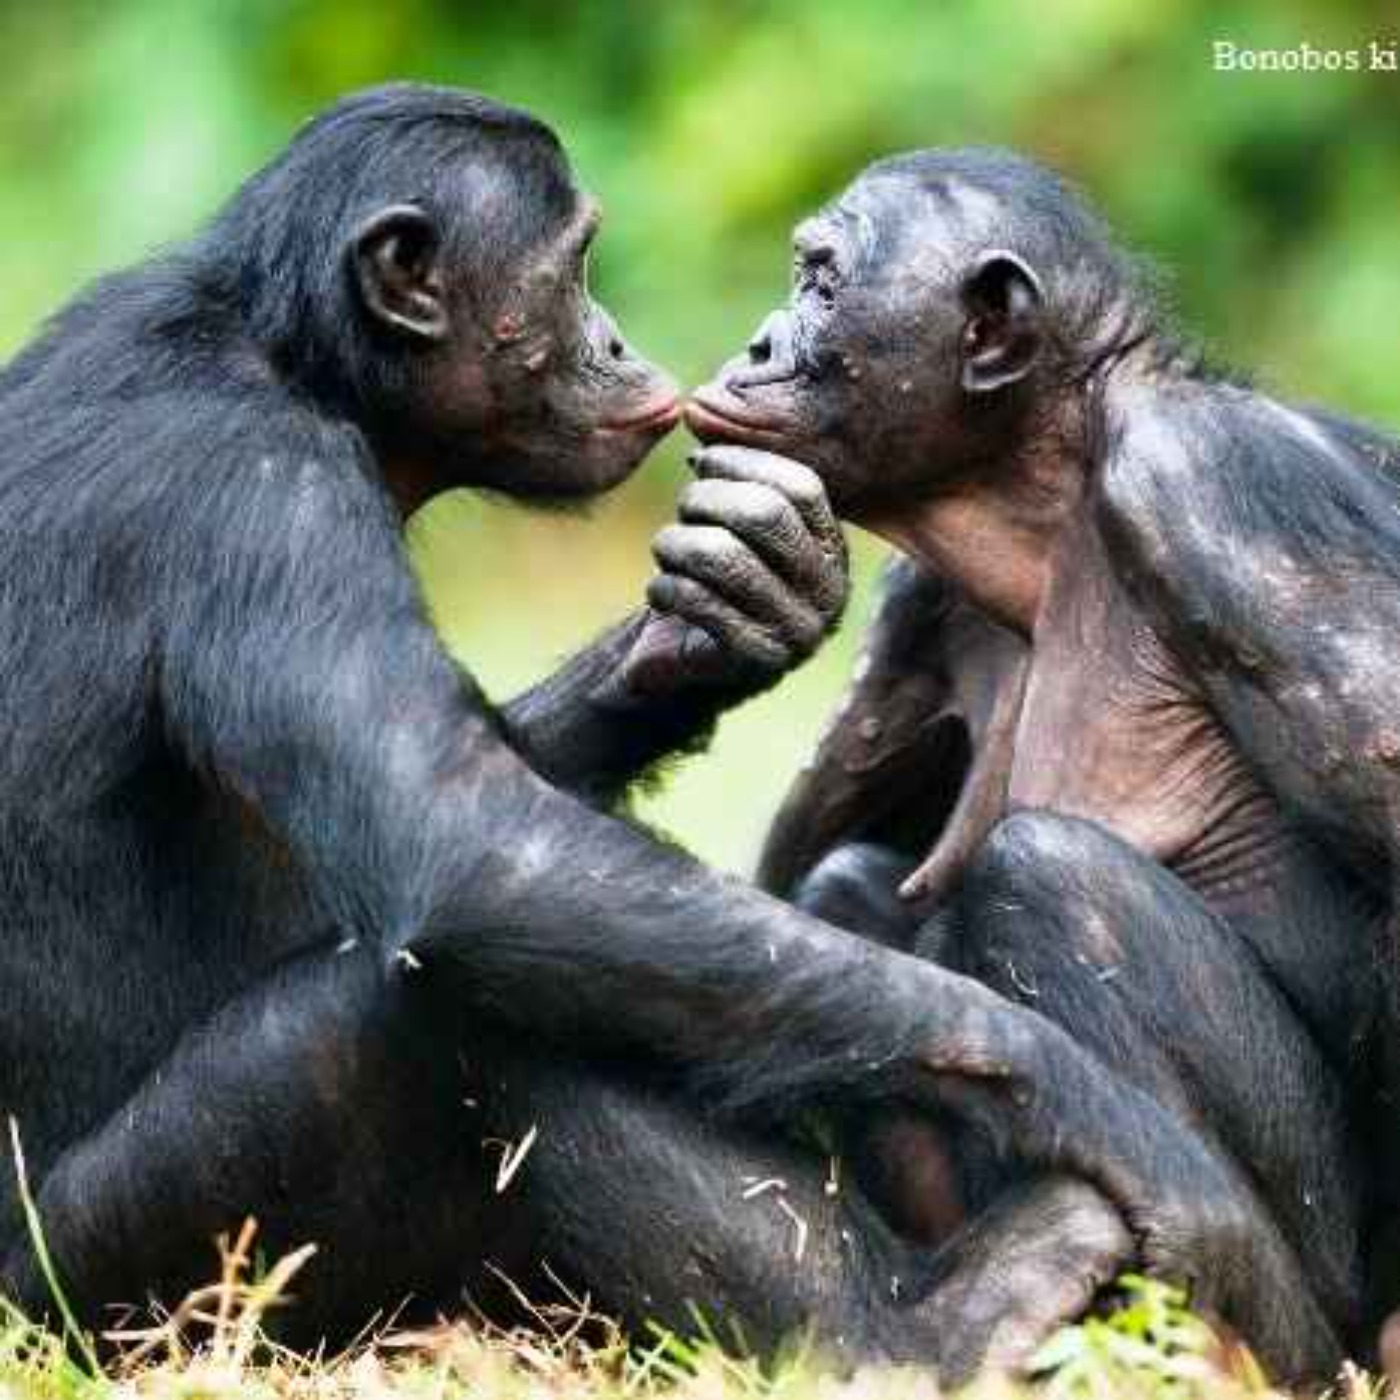 What's New In History - Bonobos and Herpes and Kissing, Oh My!